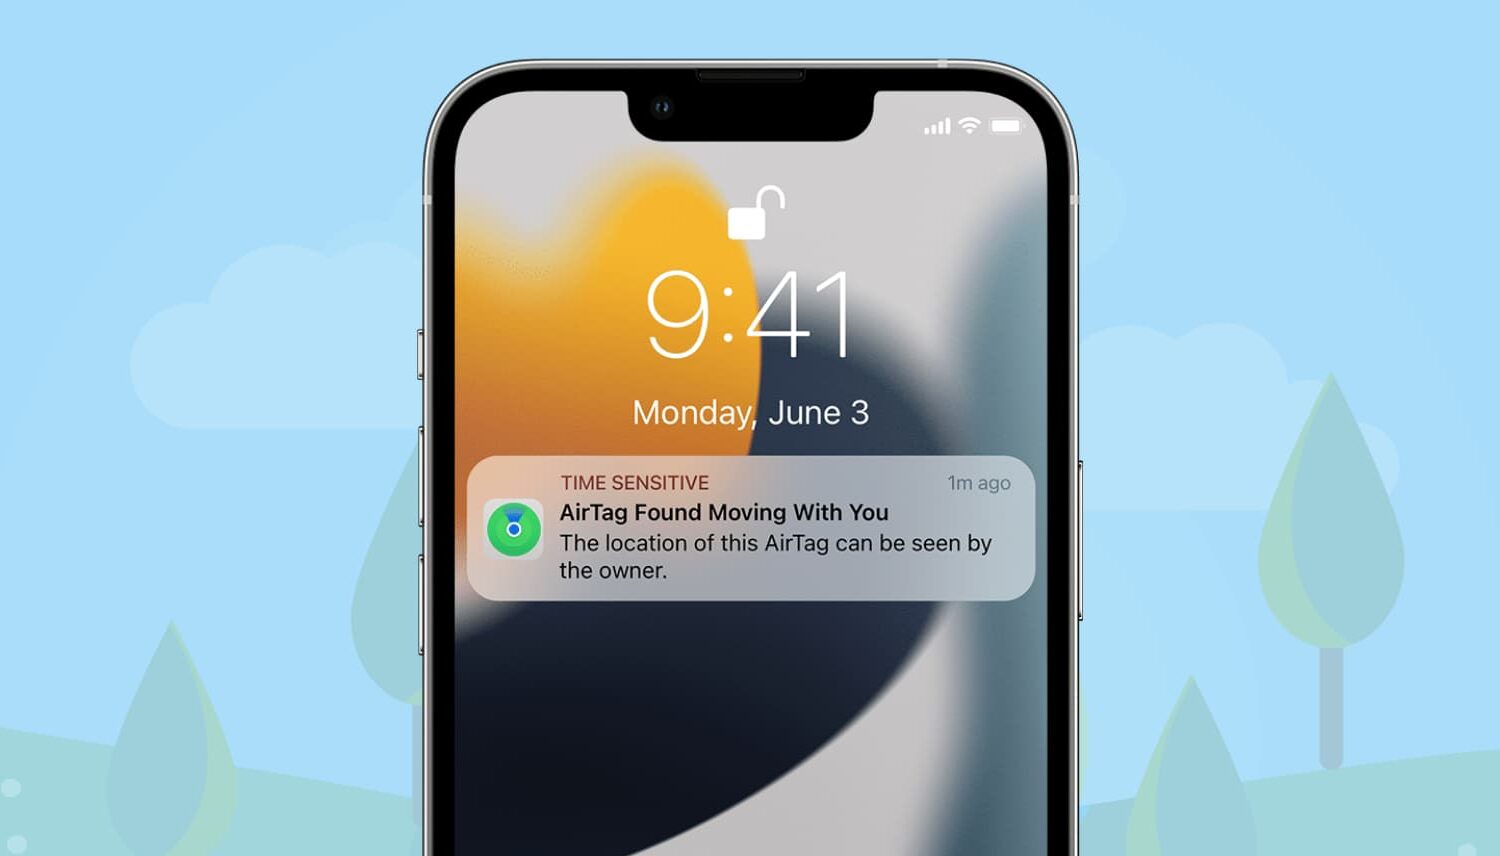 AirTag Found Moving With You notification on iPhone